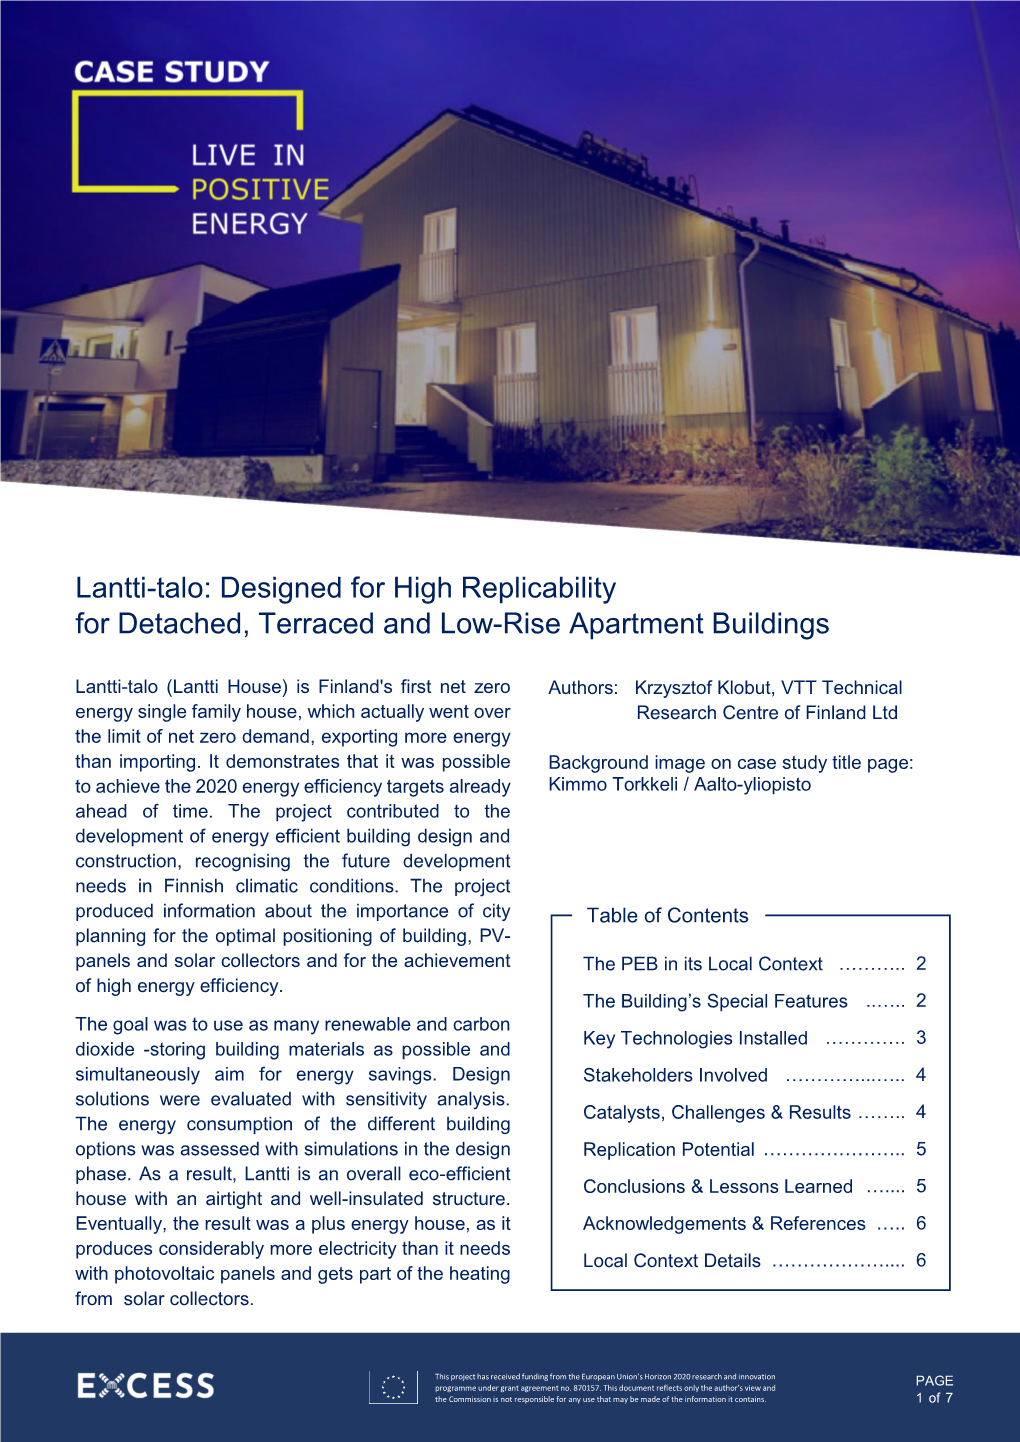 Lantti-Talo: Designed for High Replicability for Detached, Terraced and Low-Rise Apartment Buildings